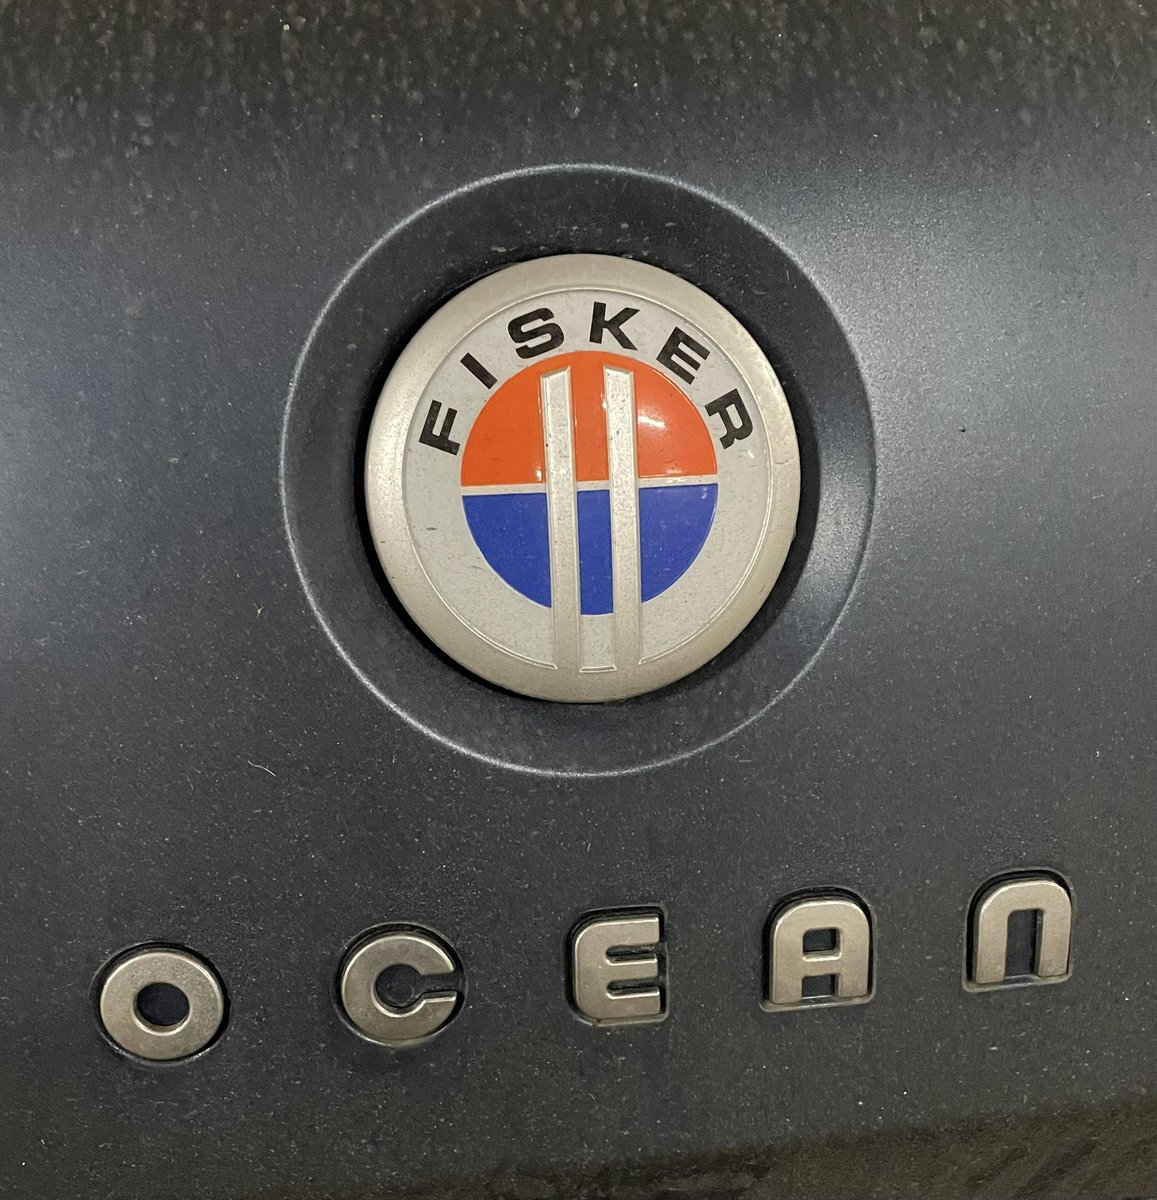 I don’t care what the haters say, I’m still rooting for the Fisker Ocean 😁 #Fisker #EV #FiskerOcean